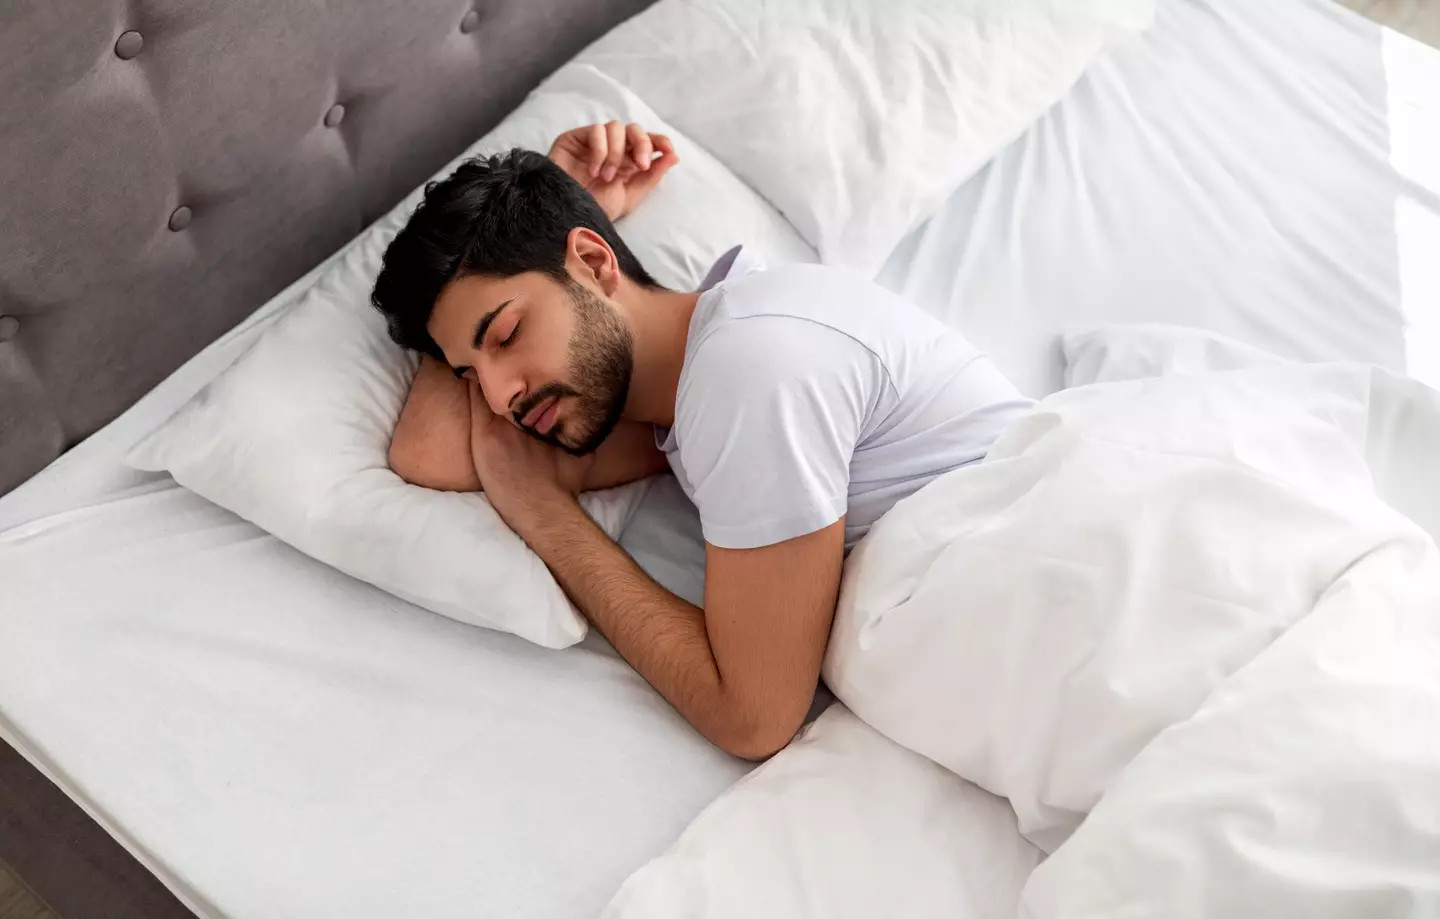 'Nocturnal erections' occur during Rapid Eye Movement sleep.